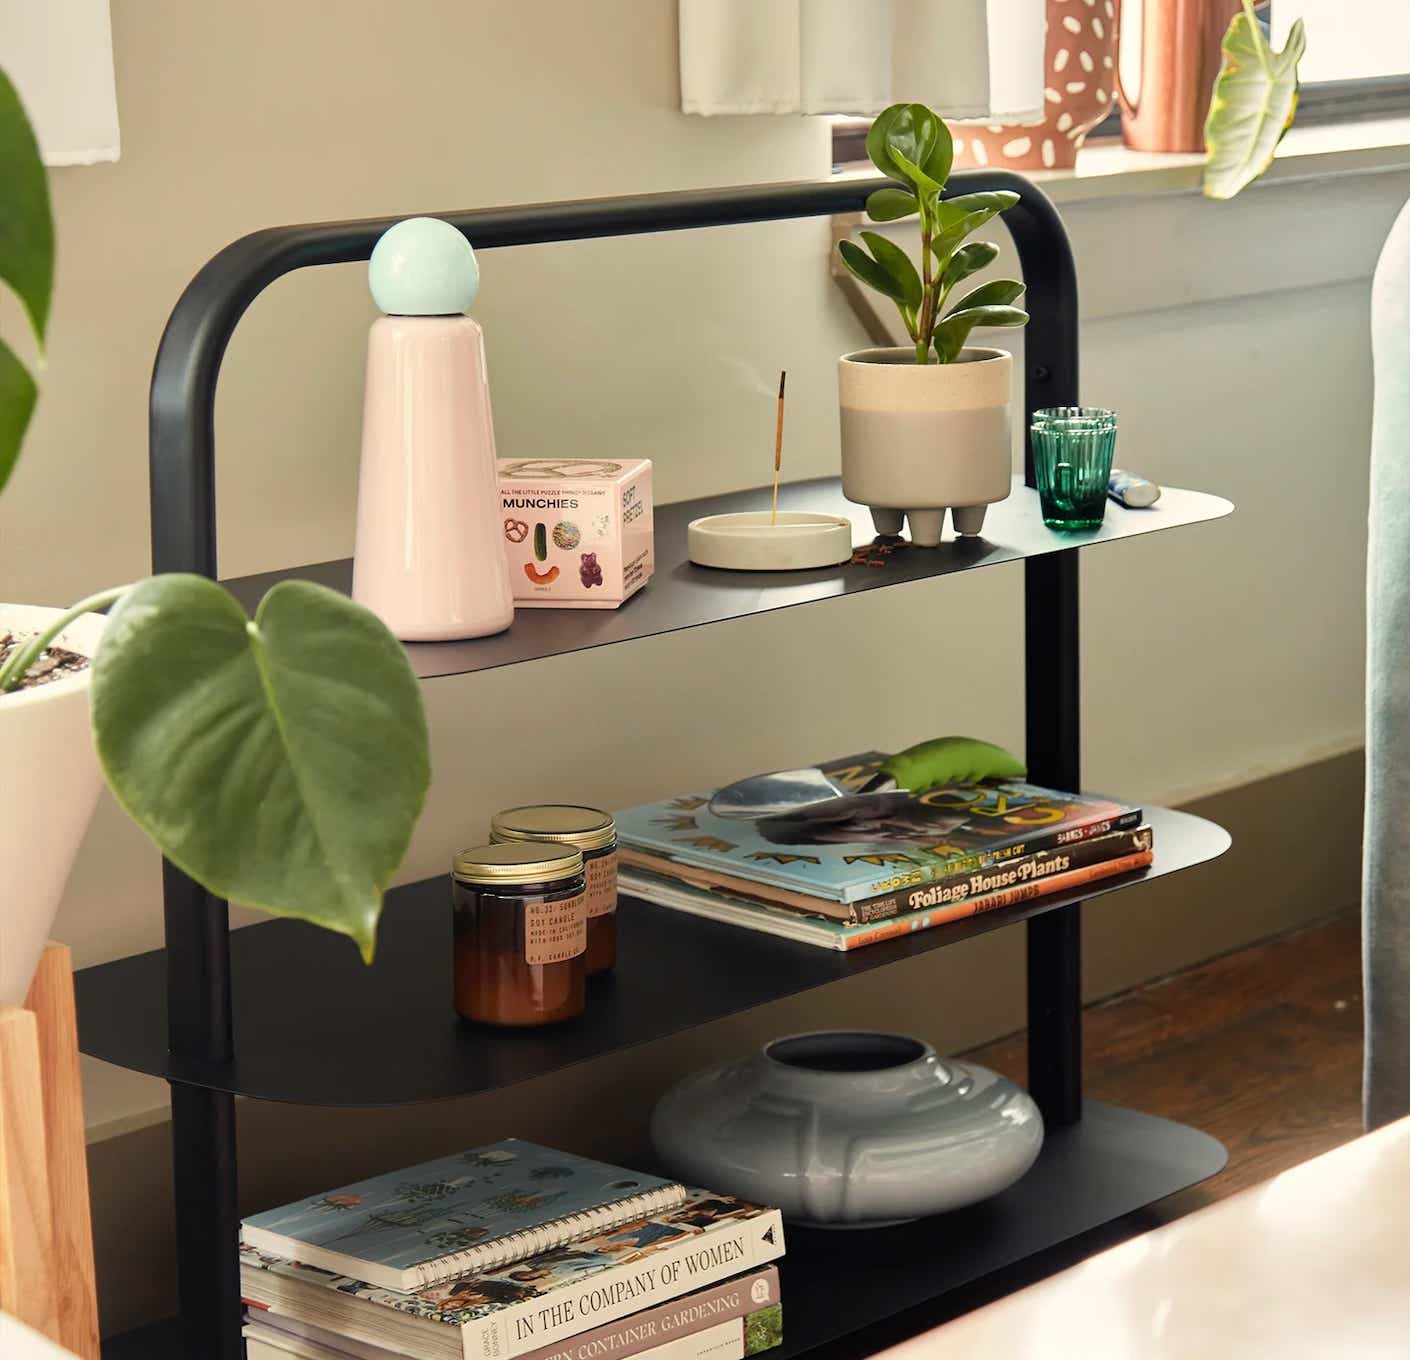 A black metal entryway rack is decorated with houseplants, books, and candles.